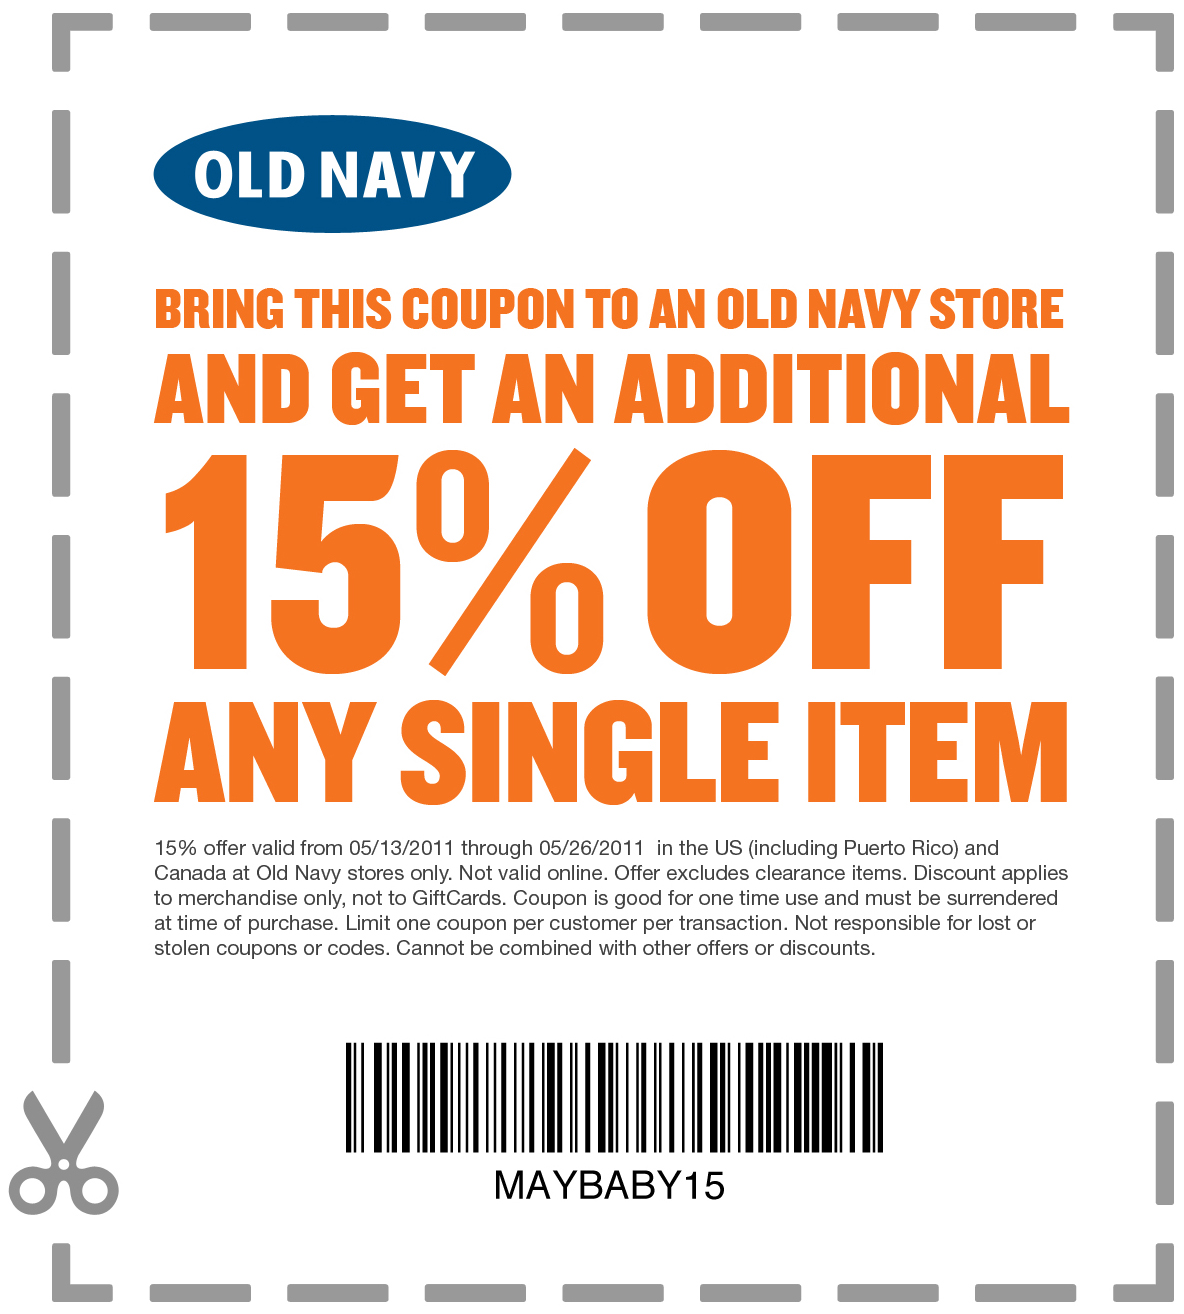 old navy online shopping coupons